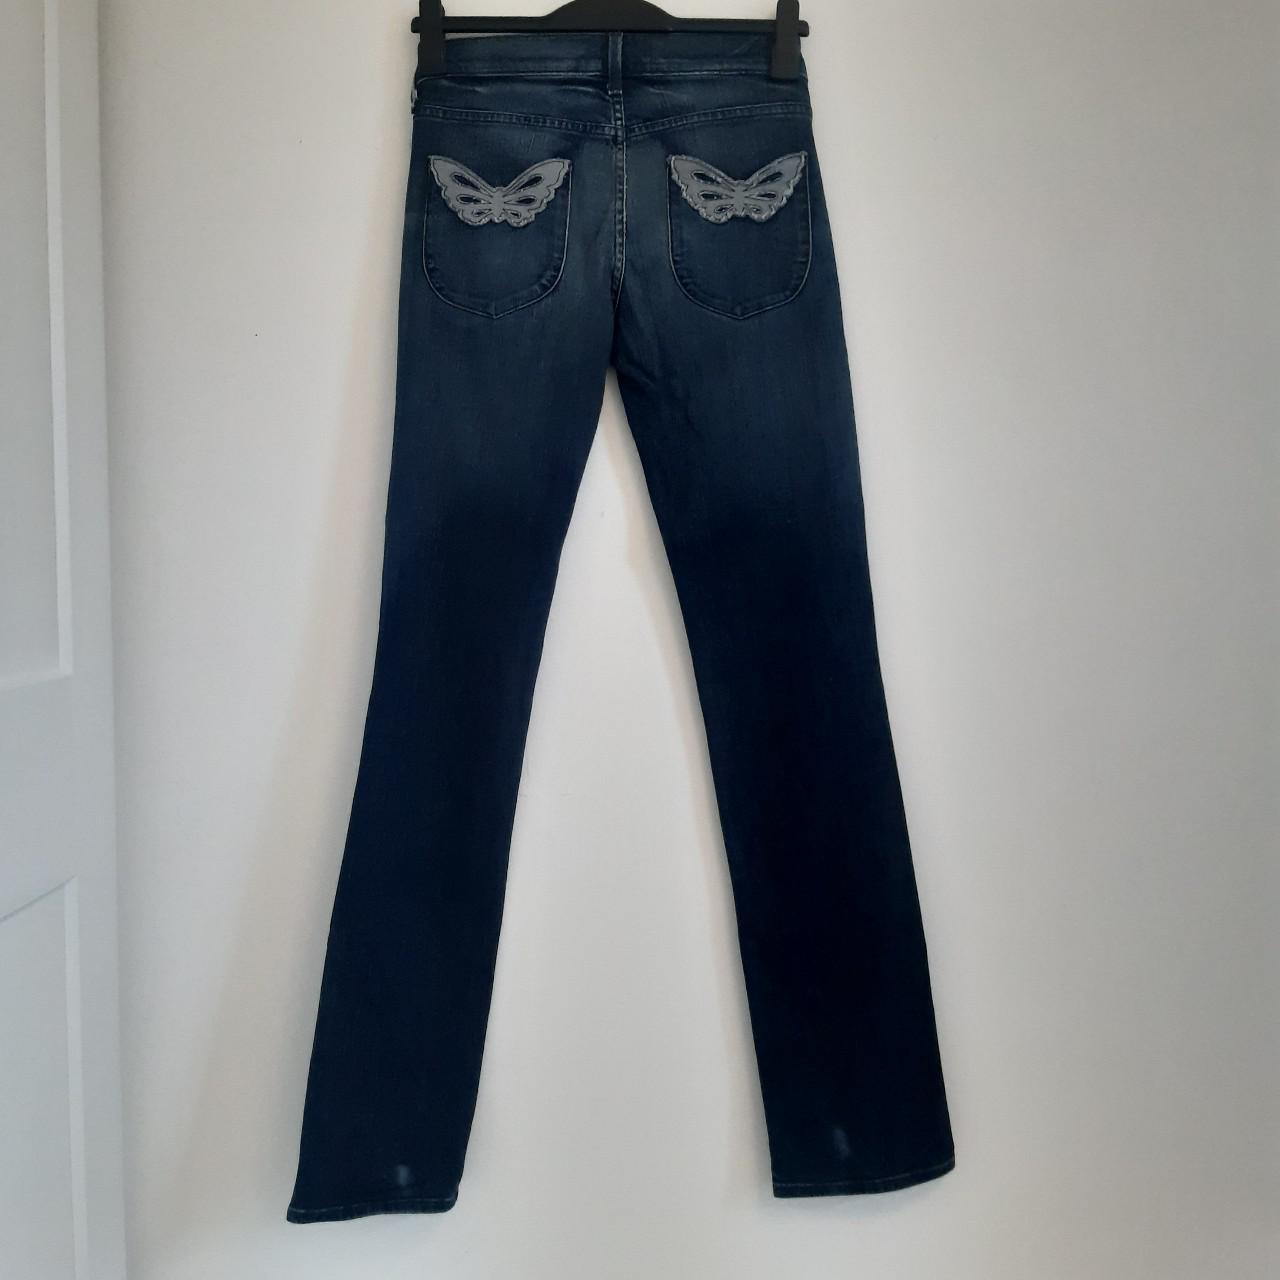 7 For All Mankind Women's Blue